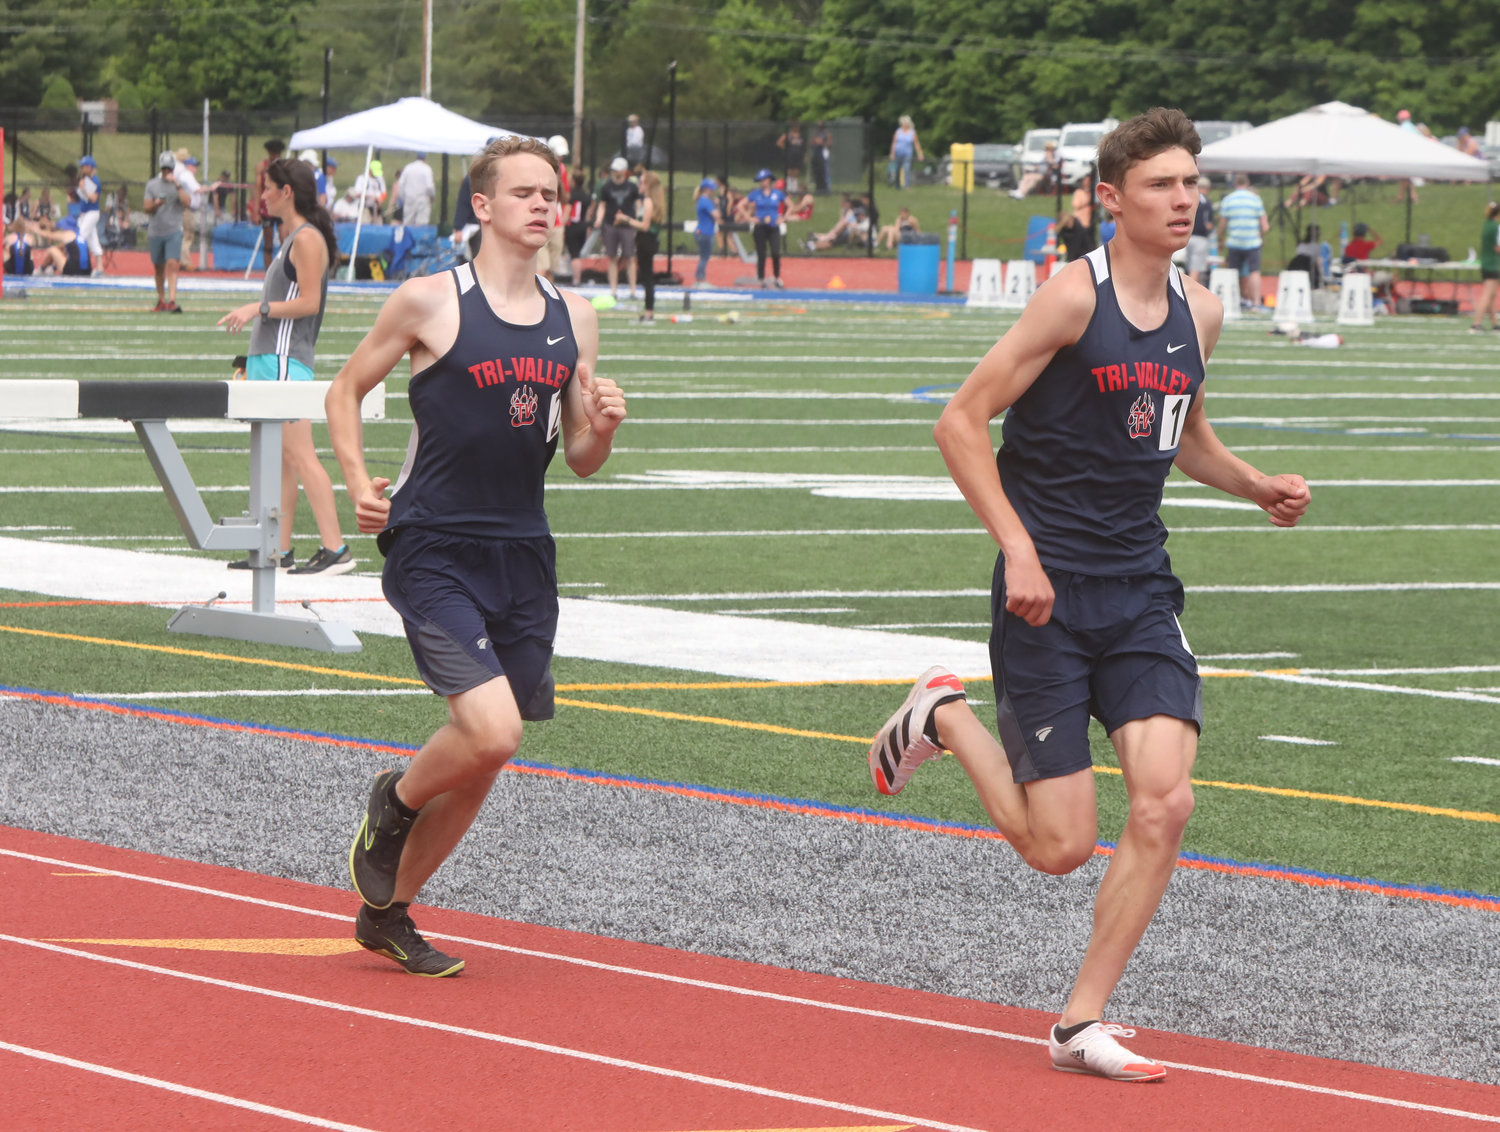 Tri-Valley’s Adam Furman (right) and Craig Costa will join teammates Caleb Edwards and Van Furman to compete in the Division II 4x800 relay at the state championships this coming weekend at Cicero North High School in Syracuse. Furman will also vie in the 3200 and the 1600, while Edwards will contend in the 3000 steeplechase. These four Bears are part of the ten athlete county contingent going to states this spring.